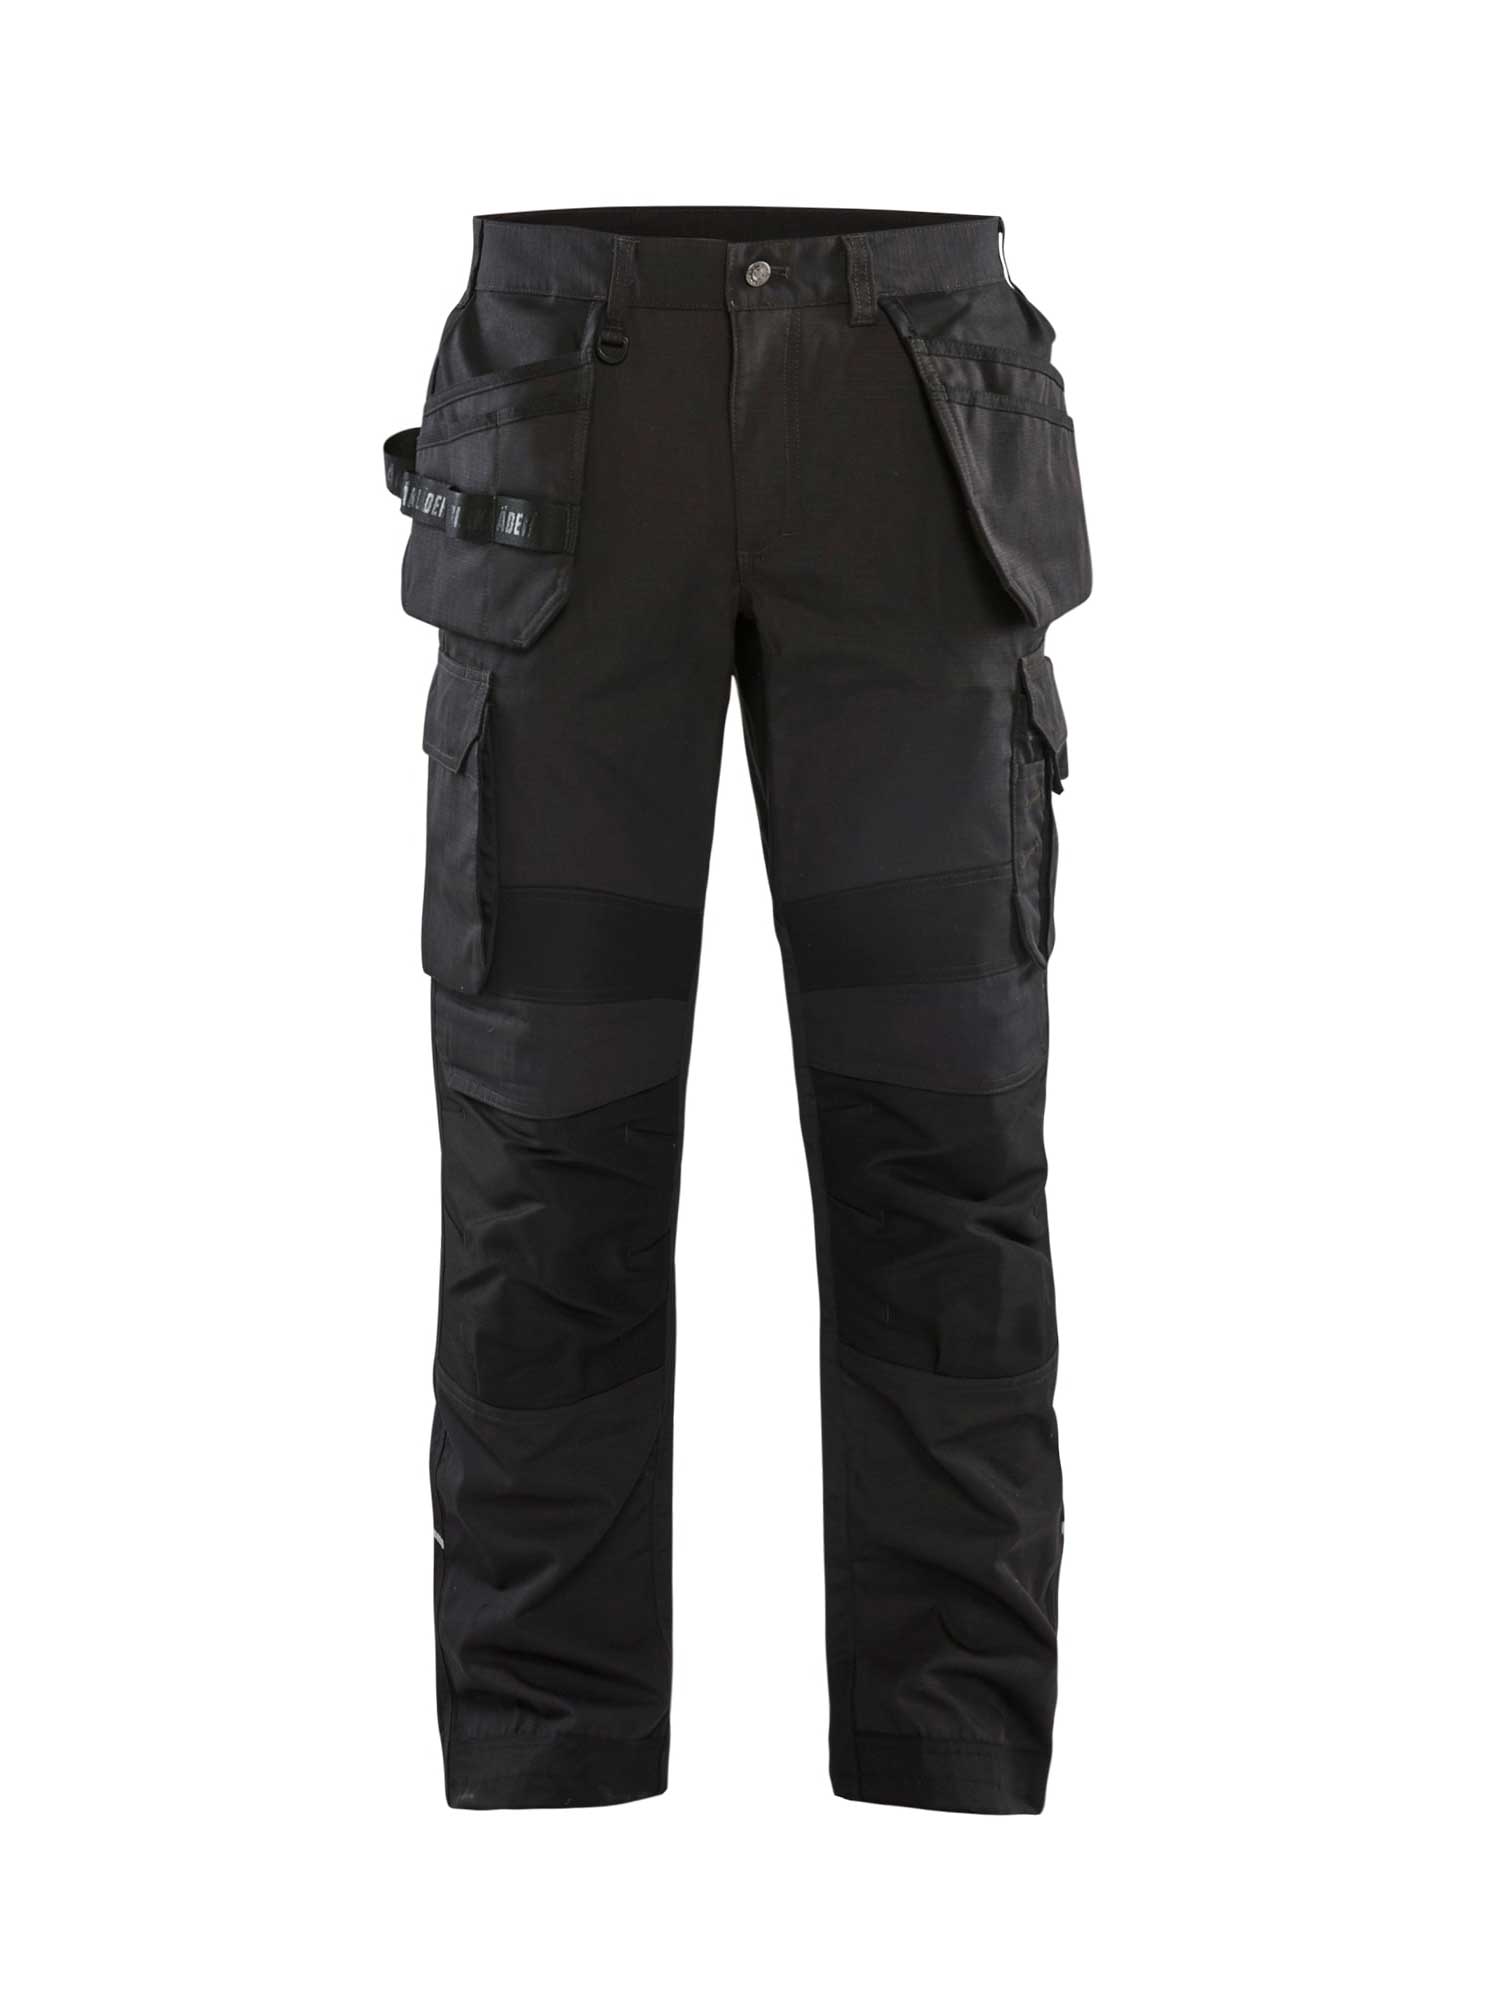 Blaklader Ripstop Pants With Utility Pockets - 16911330